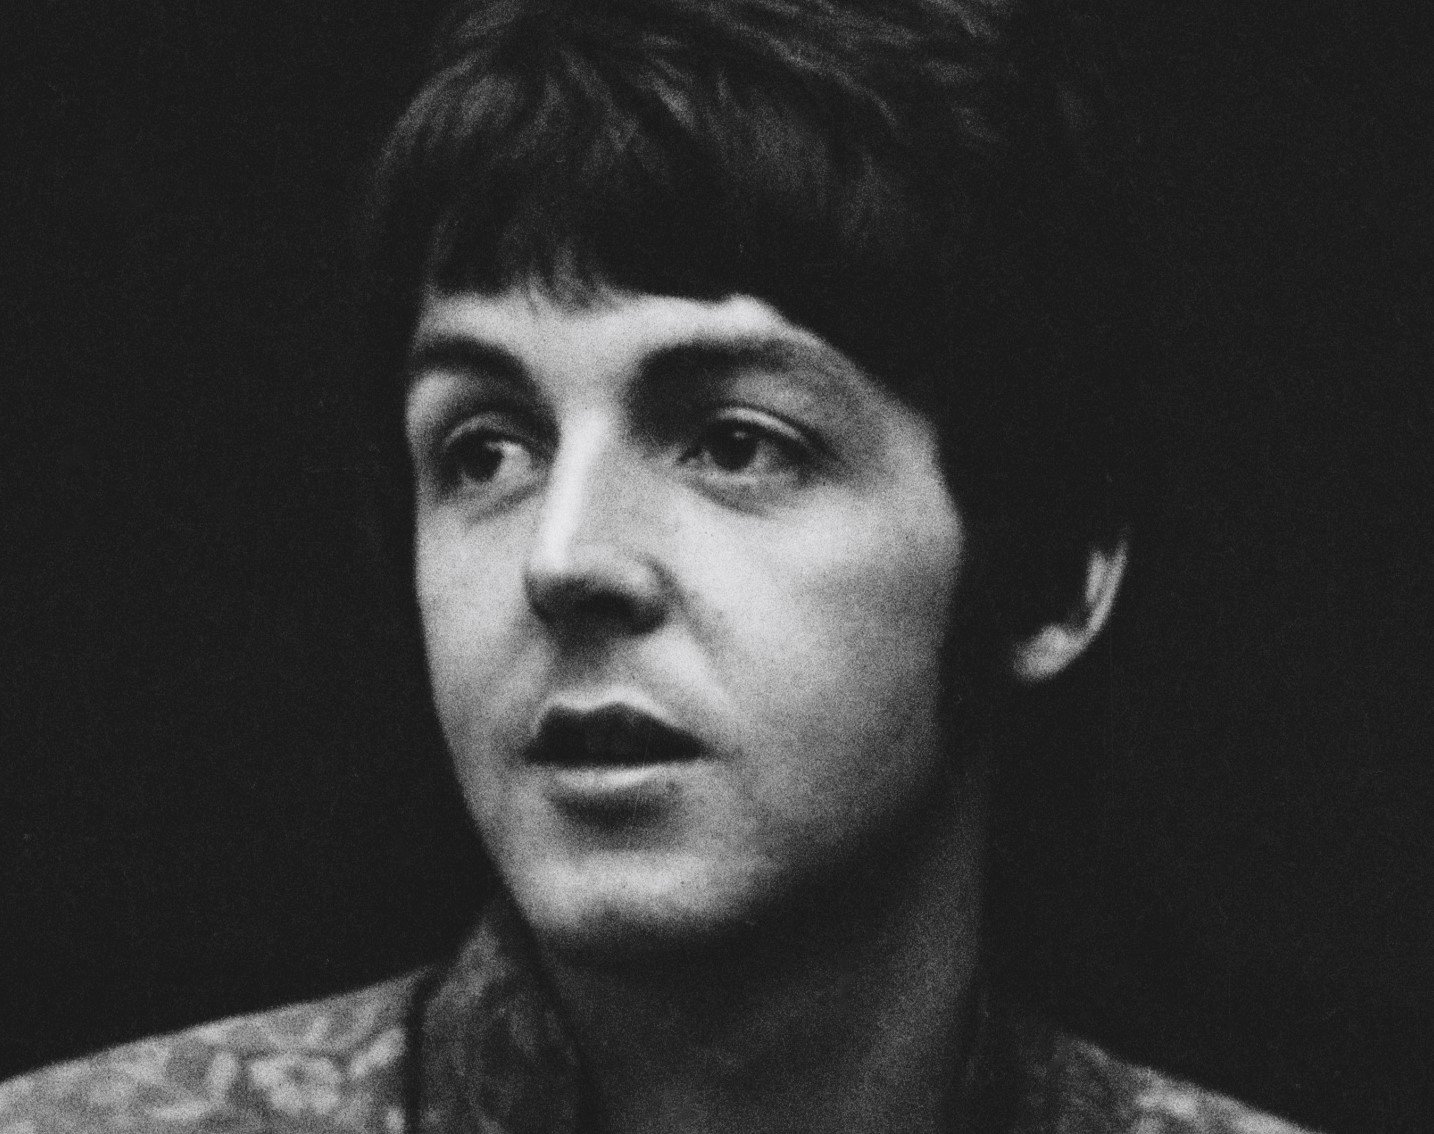 How Old Was Paul McCartney When He Wrote 'Yesterday'? - NewsFinale